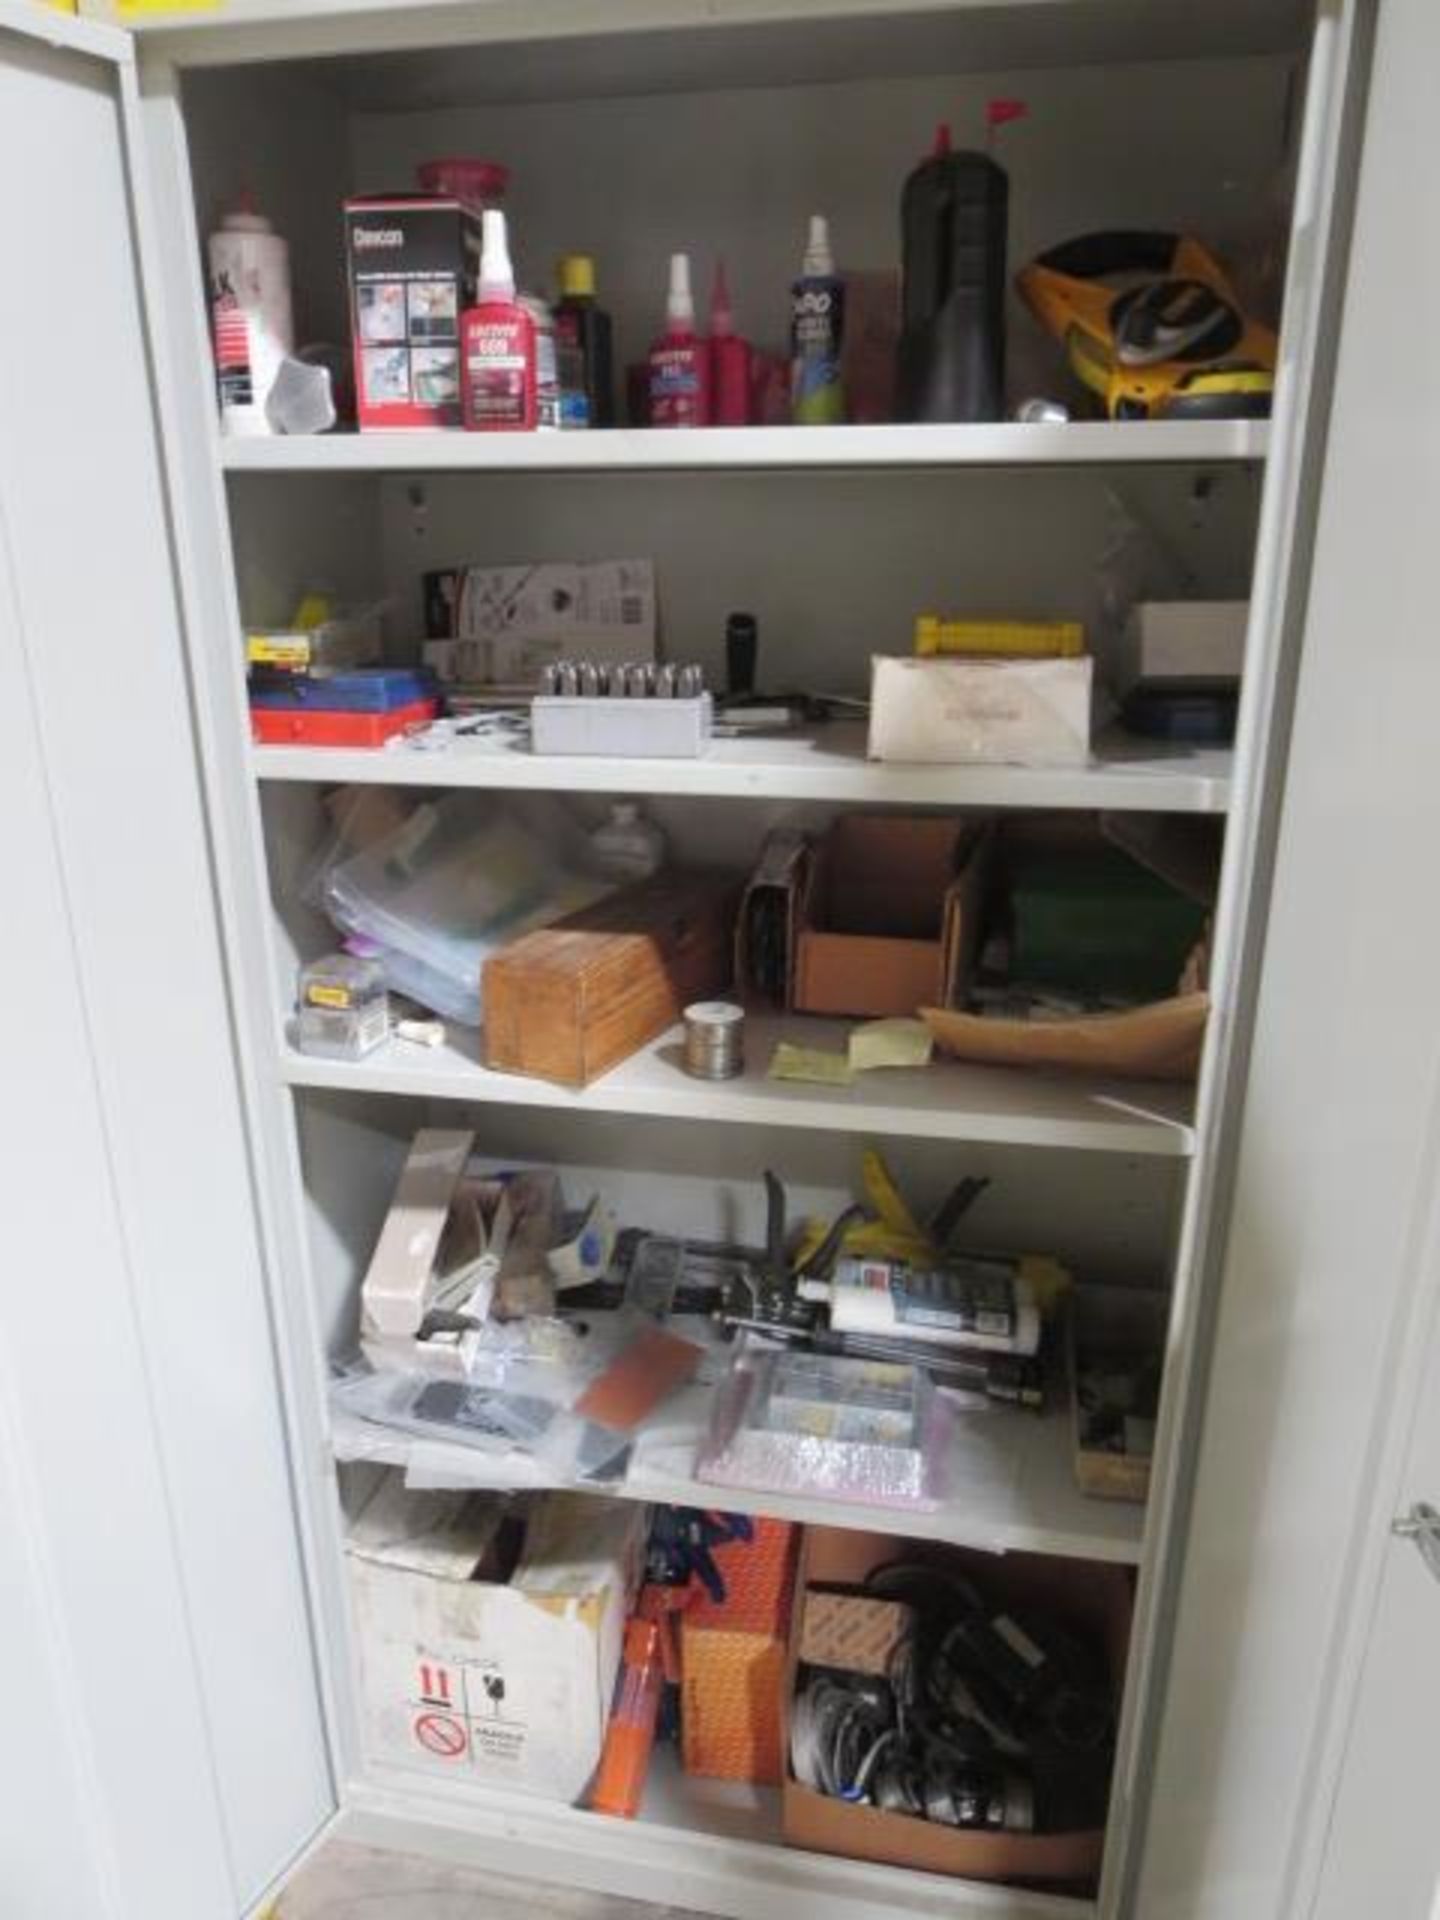 2 Door Metal Storage Cabinet, Includes Contents Consisting of Assorted Cleaning Products and - Image 2 of 2